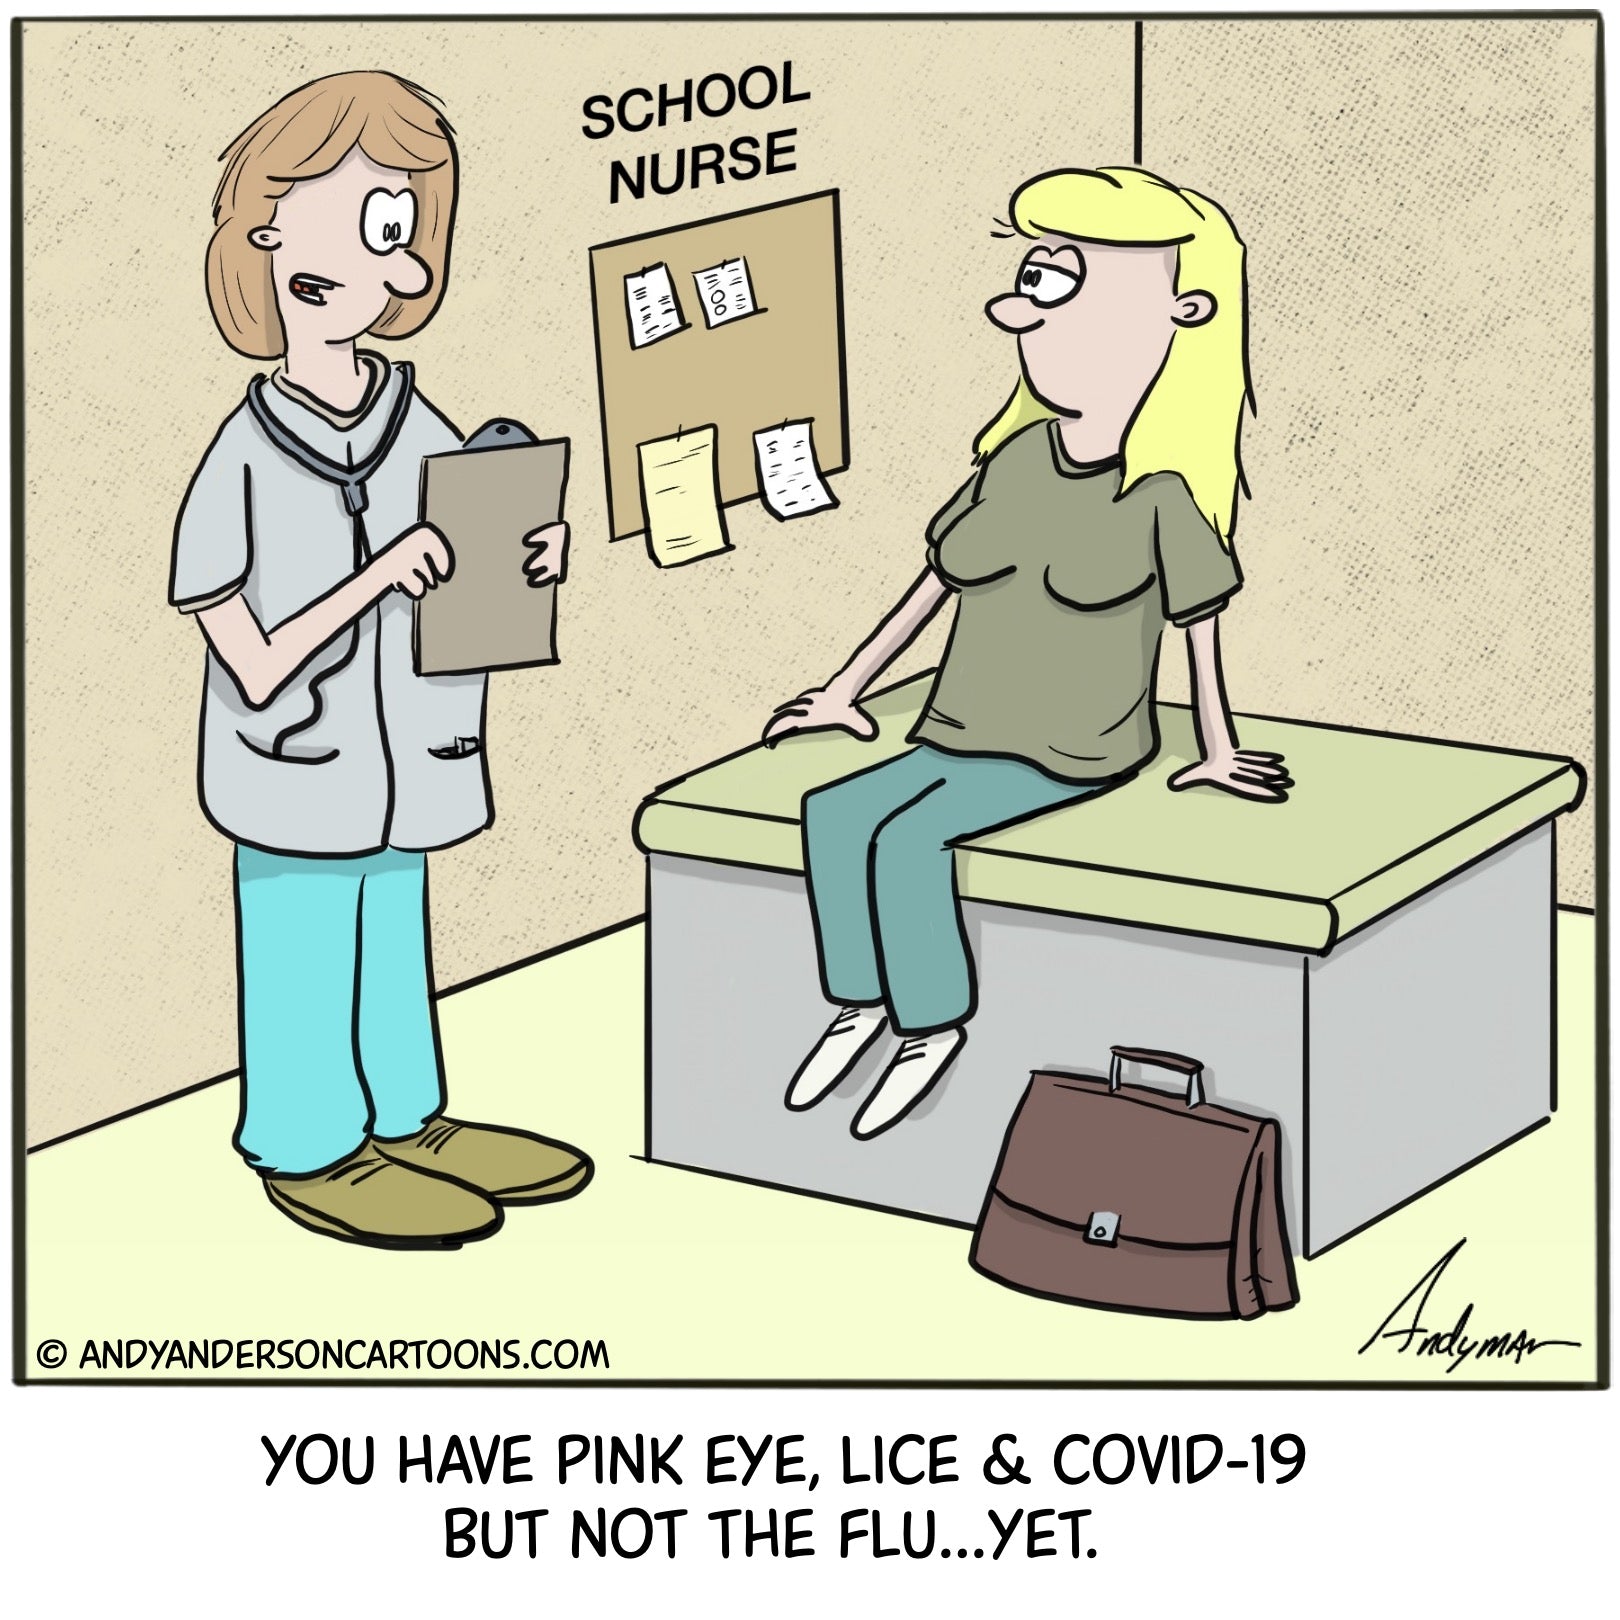 Cartoon about teachers going back to school and getting pink eye, lice COVID-19 but not the flu yet